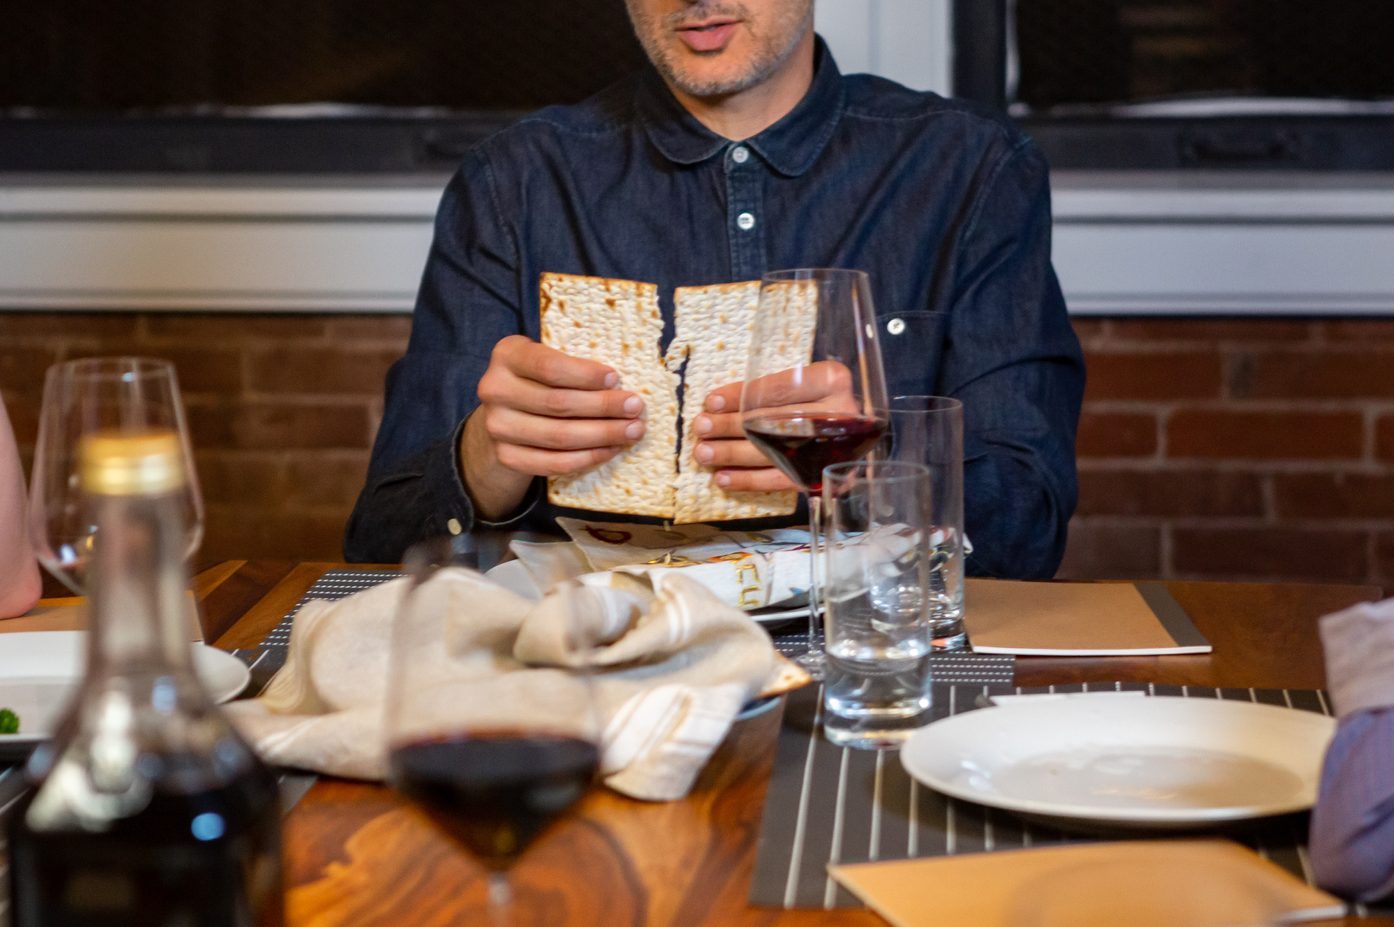 What Is Matzo? The History of Eating Unleavened Bread at Passover